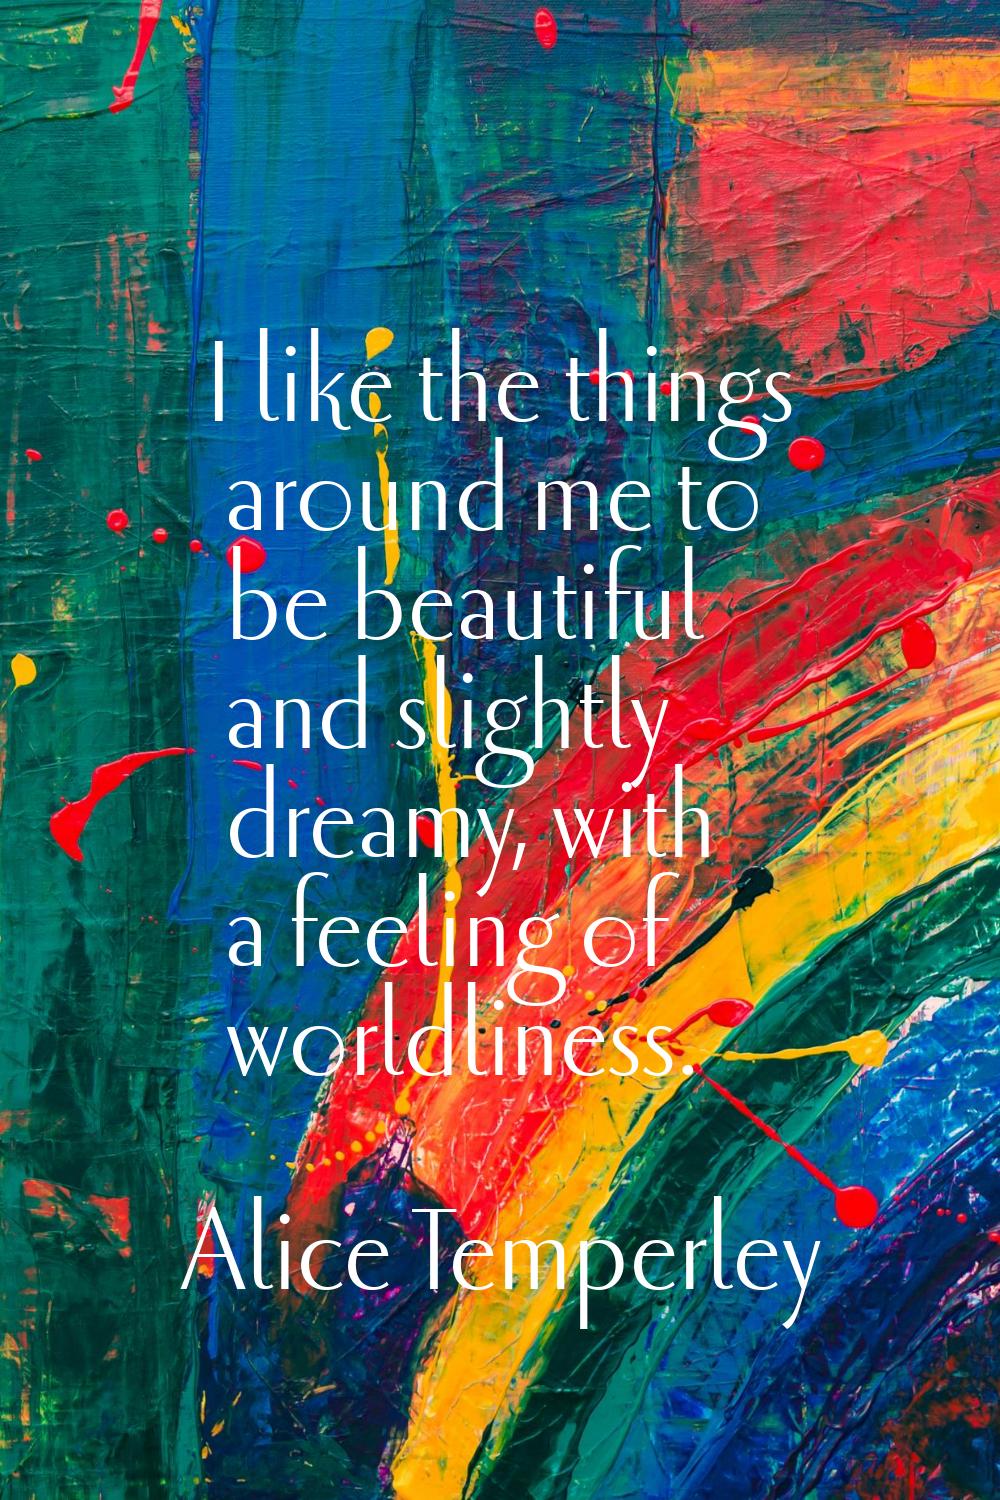 I like the things around me to be beautiful and slightly dreamy, with a feeling of worldliness.